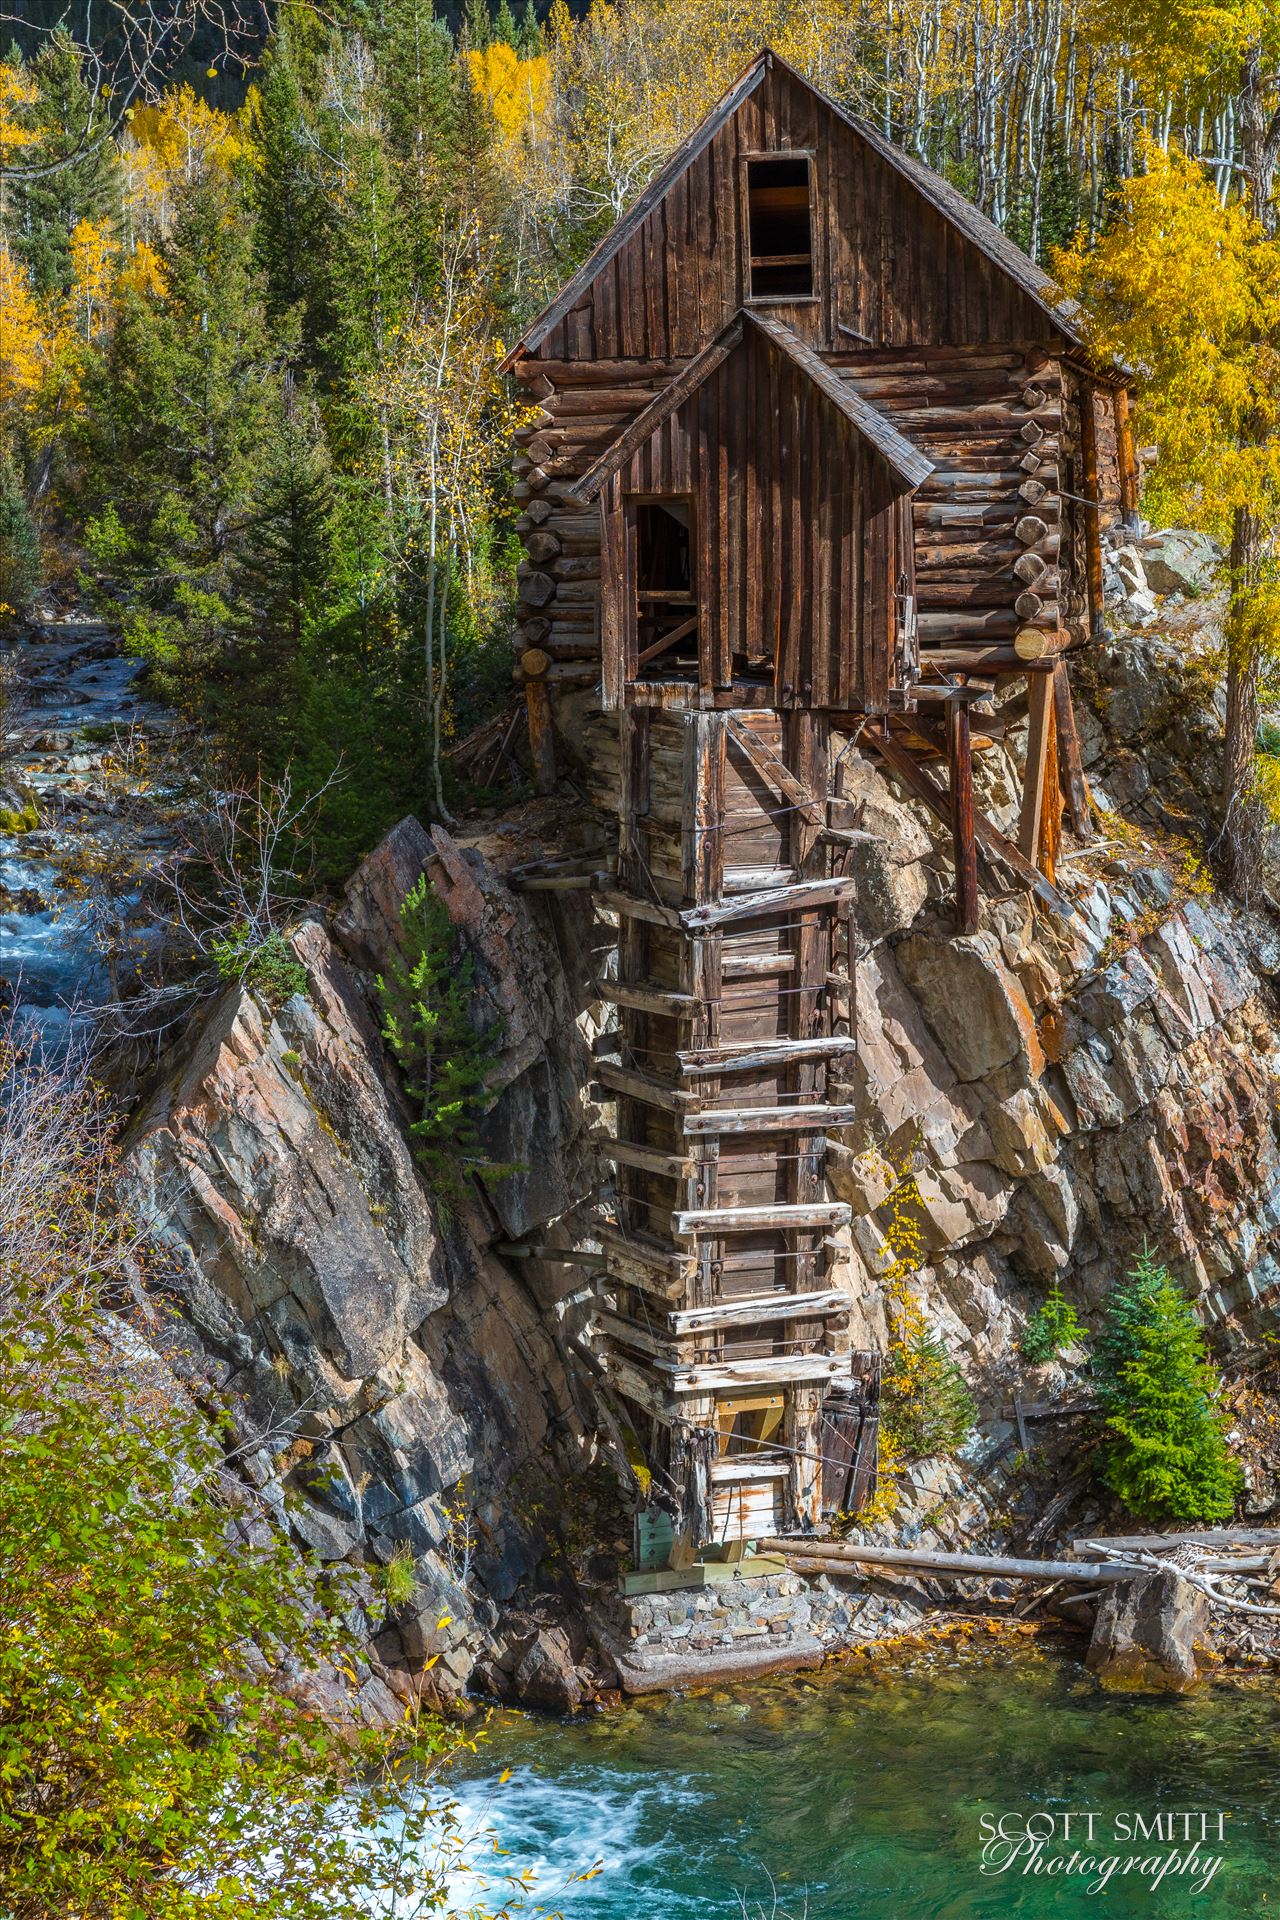 Crystal Mill, Colorado 10 - The Crystal Mill, or the Old Mill is an 1892 wooden powerhouse located on an outcrop above the Crystal River in Crystal, Colorado by Scott Smith Photos